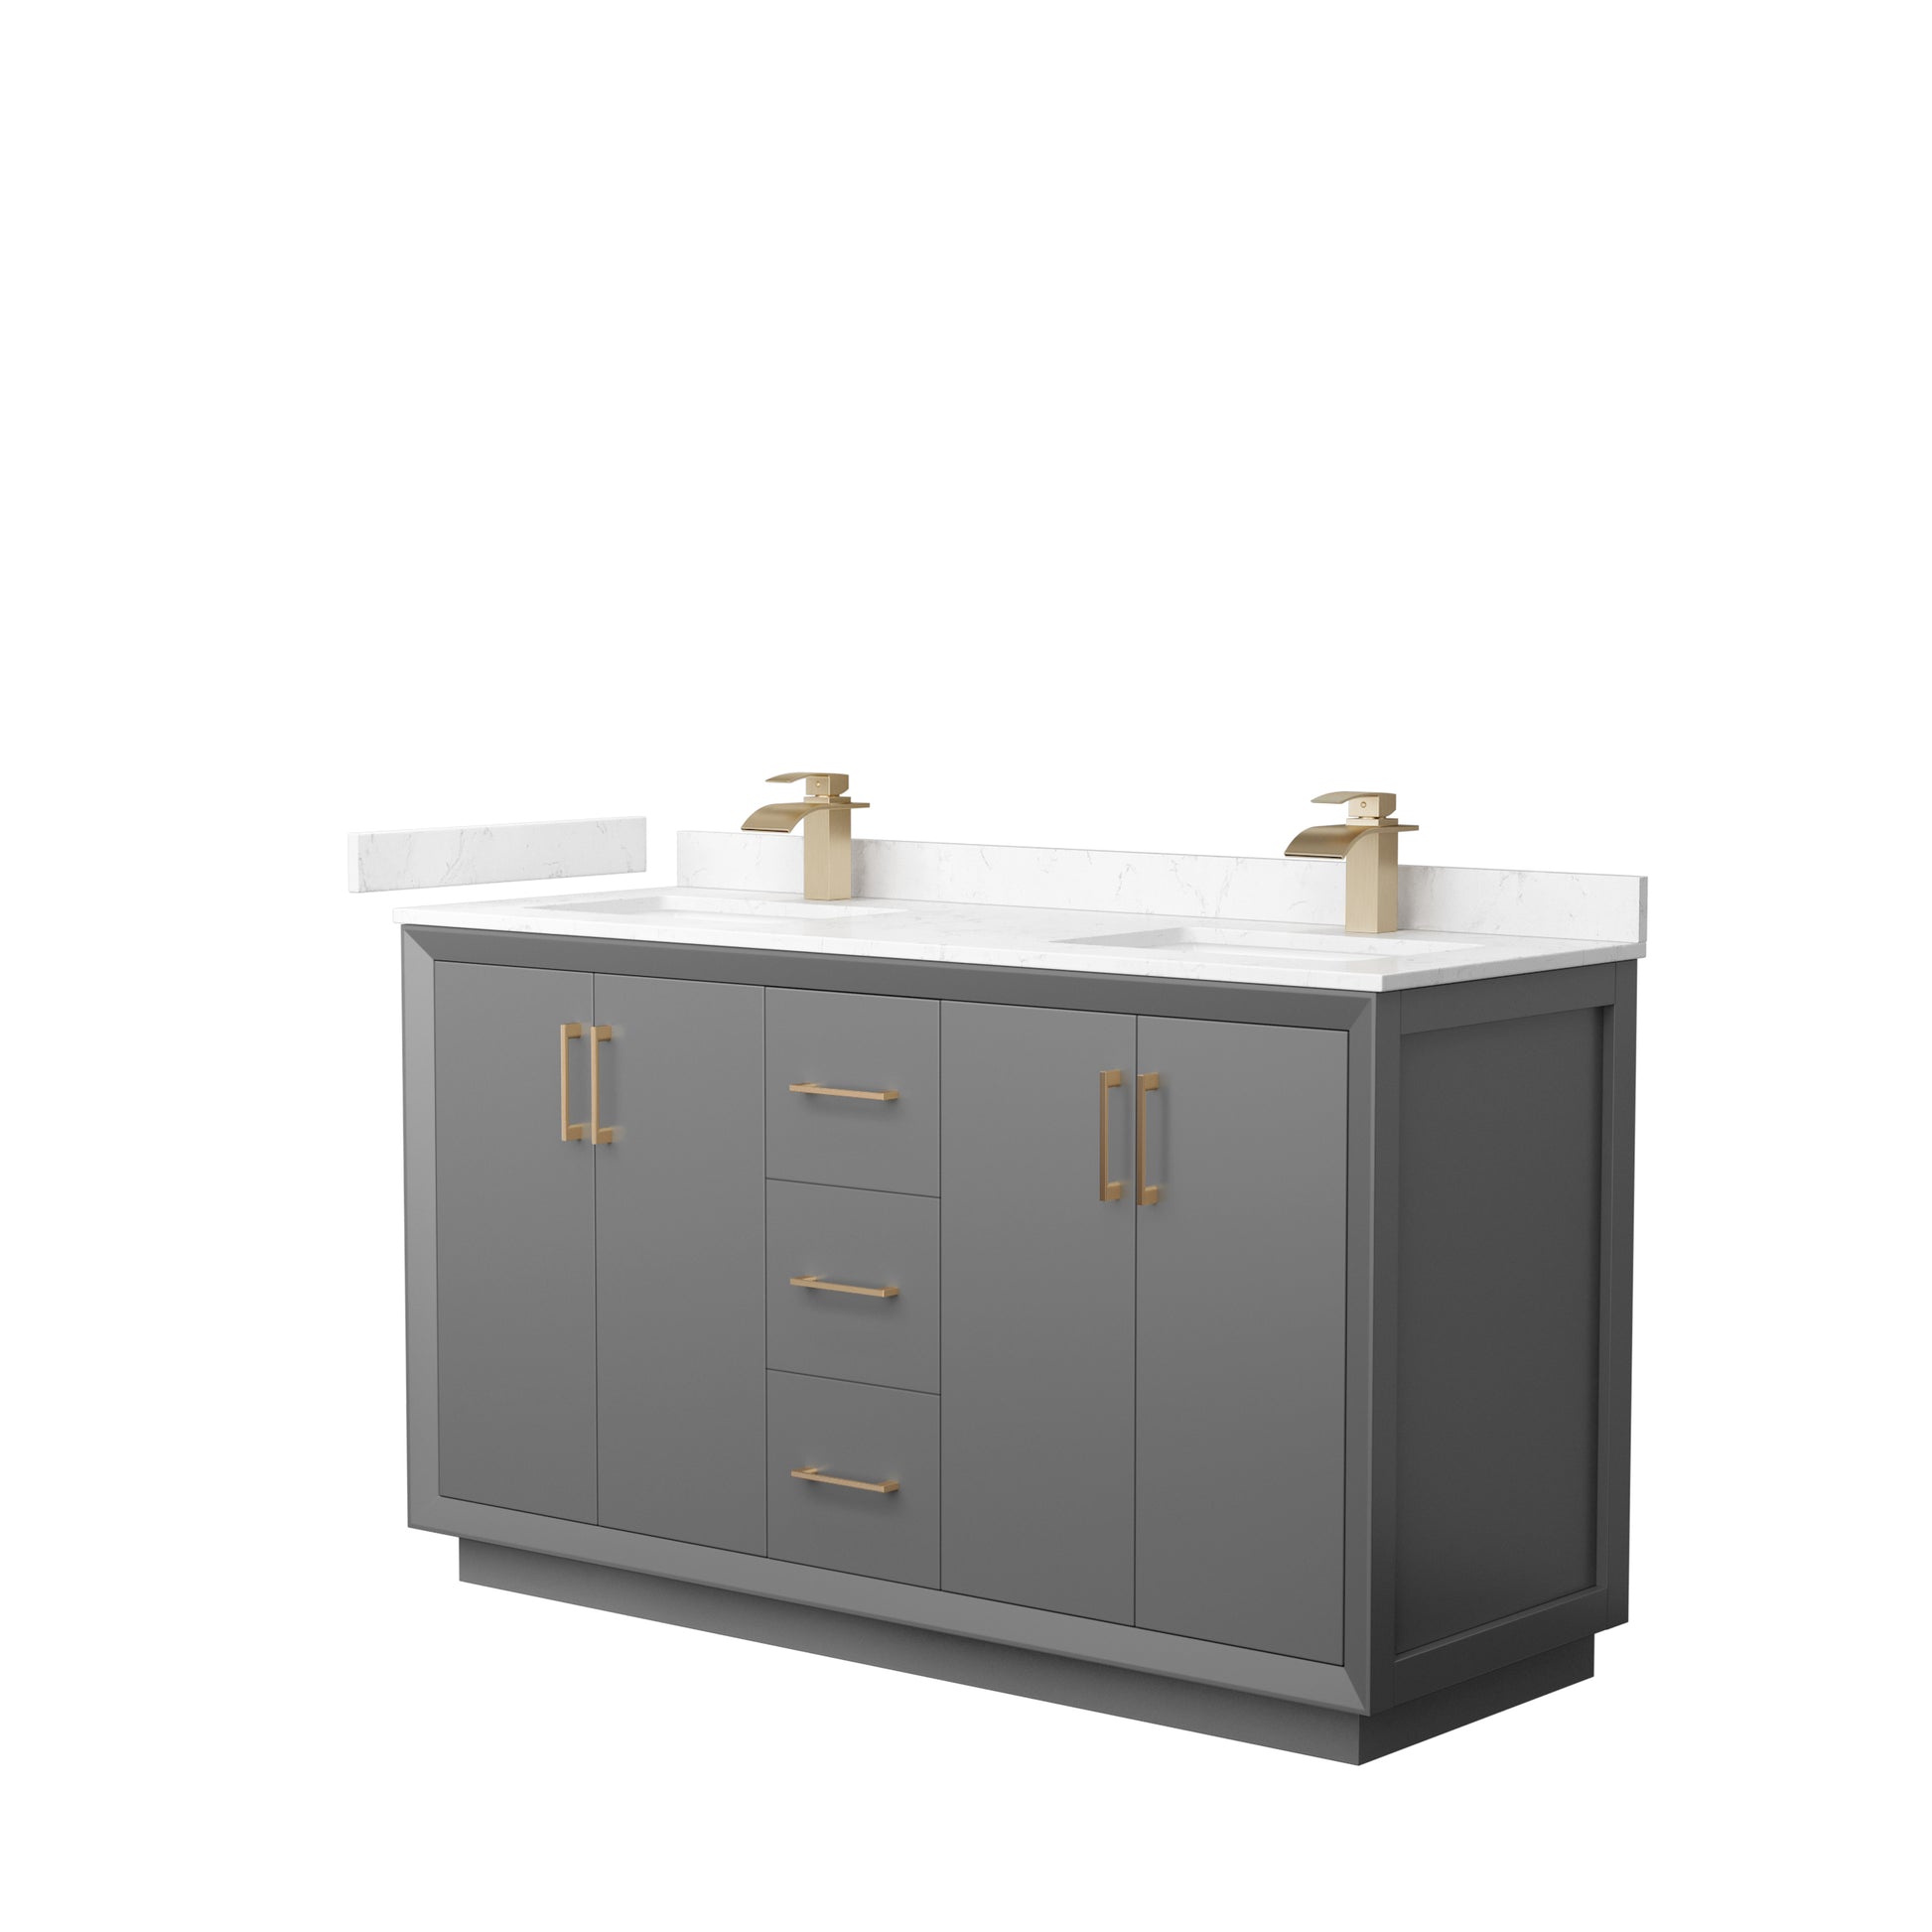 
  
  Strada Double Sink Vanity with Carrara Cultured Marble, Undermount Square Sink, Optional Trim and Mirror
  
